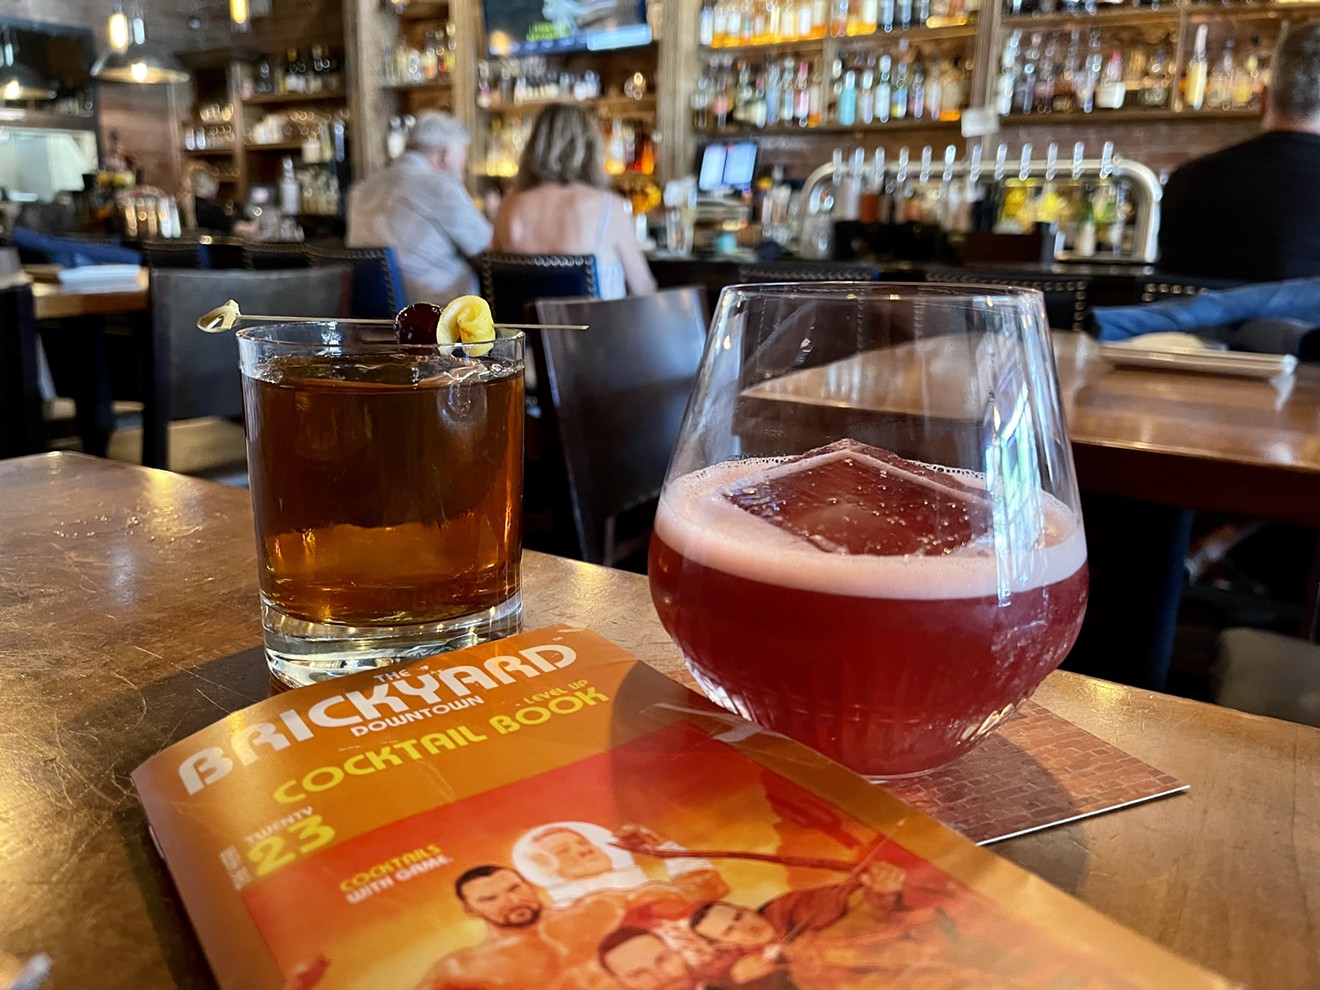 Pick a drink from the video game-themed "Level Up Cocktail Book" at The Brickyard.